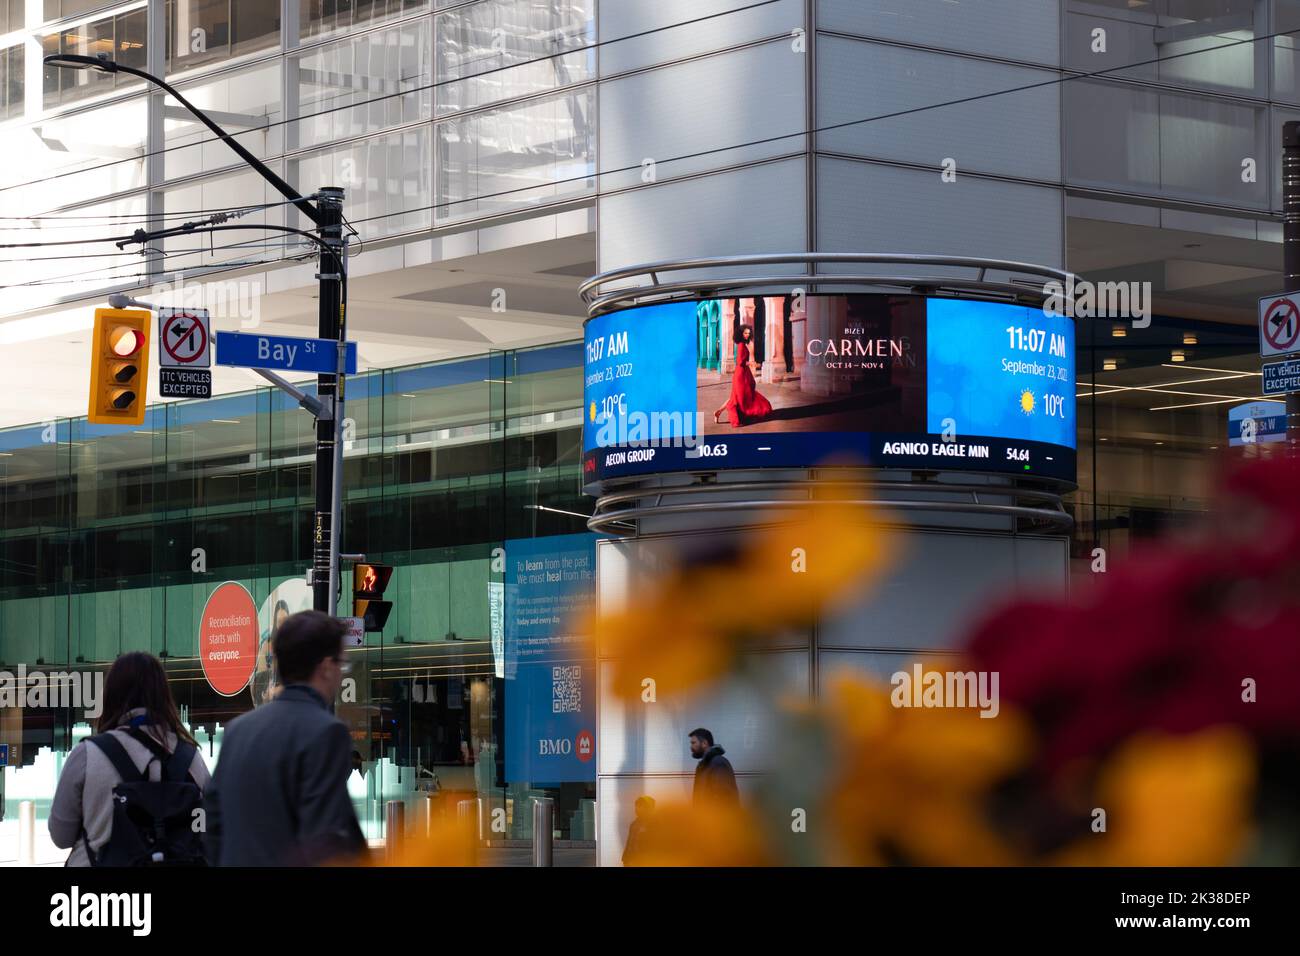 A Bay St. street sign is seen at the base of BMO's First Canadian Place in Toronto Financial District. as people walk by a TSX digital ticker sign. Stock Photo